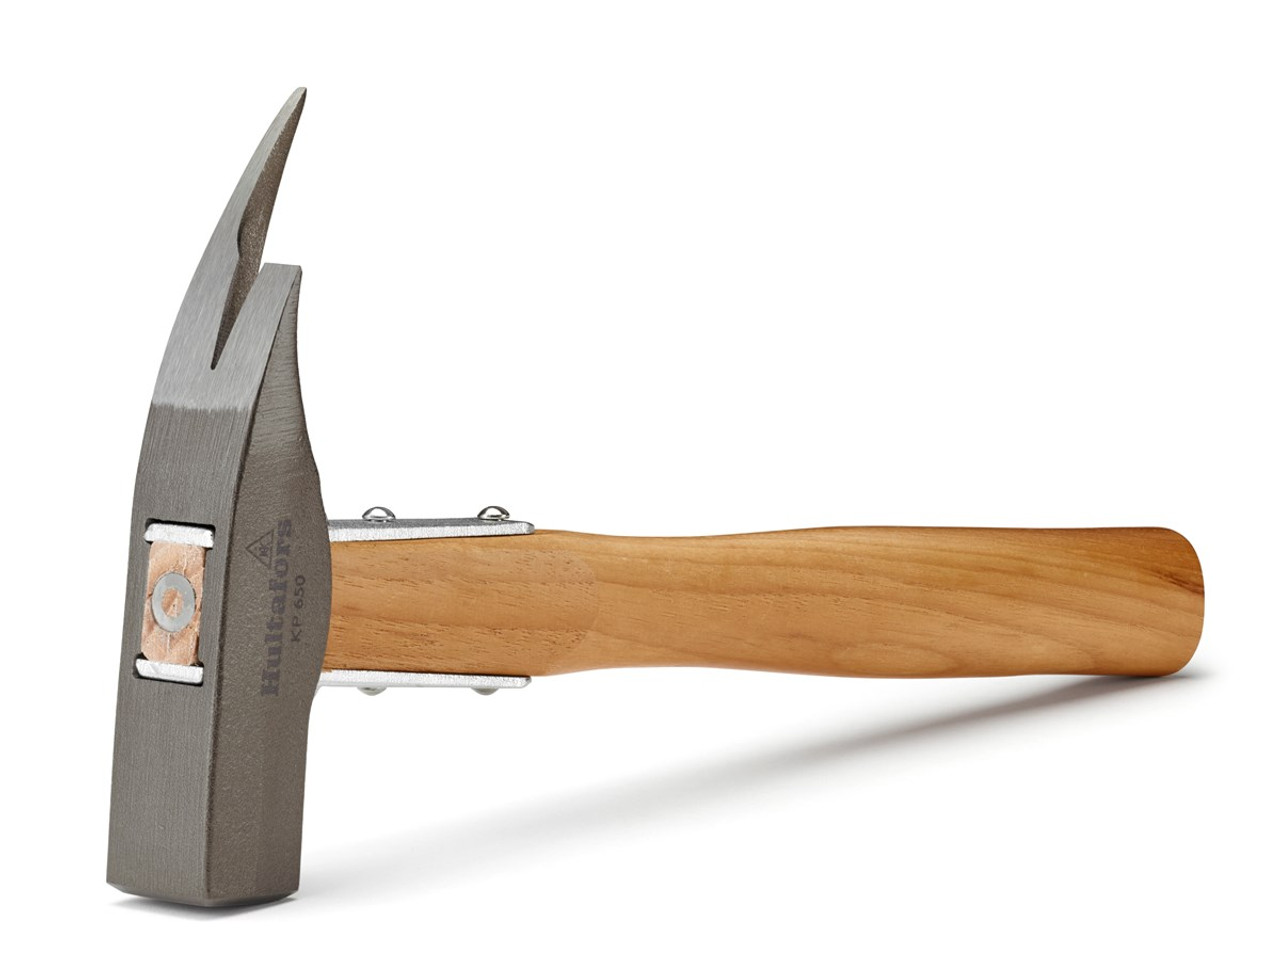 Hammers KP650 from HULTAFORS for Carpenters that have Carpenters Hammer available in Australia and New Zealand